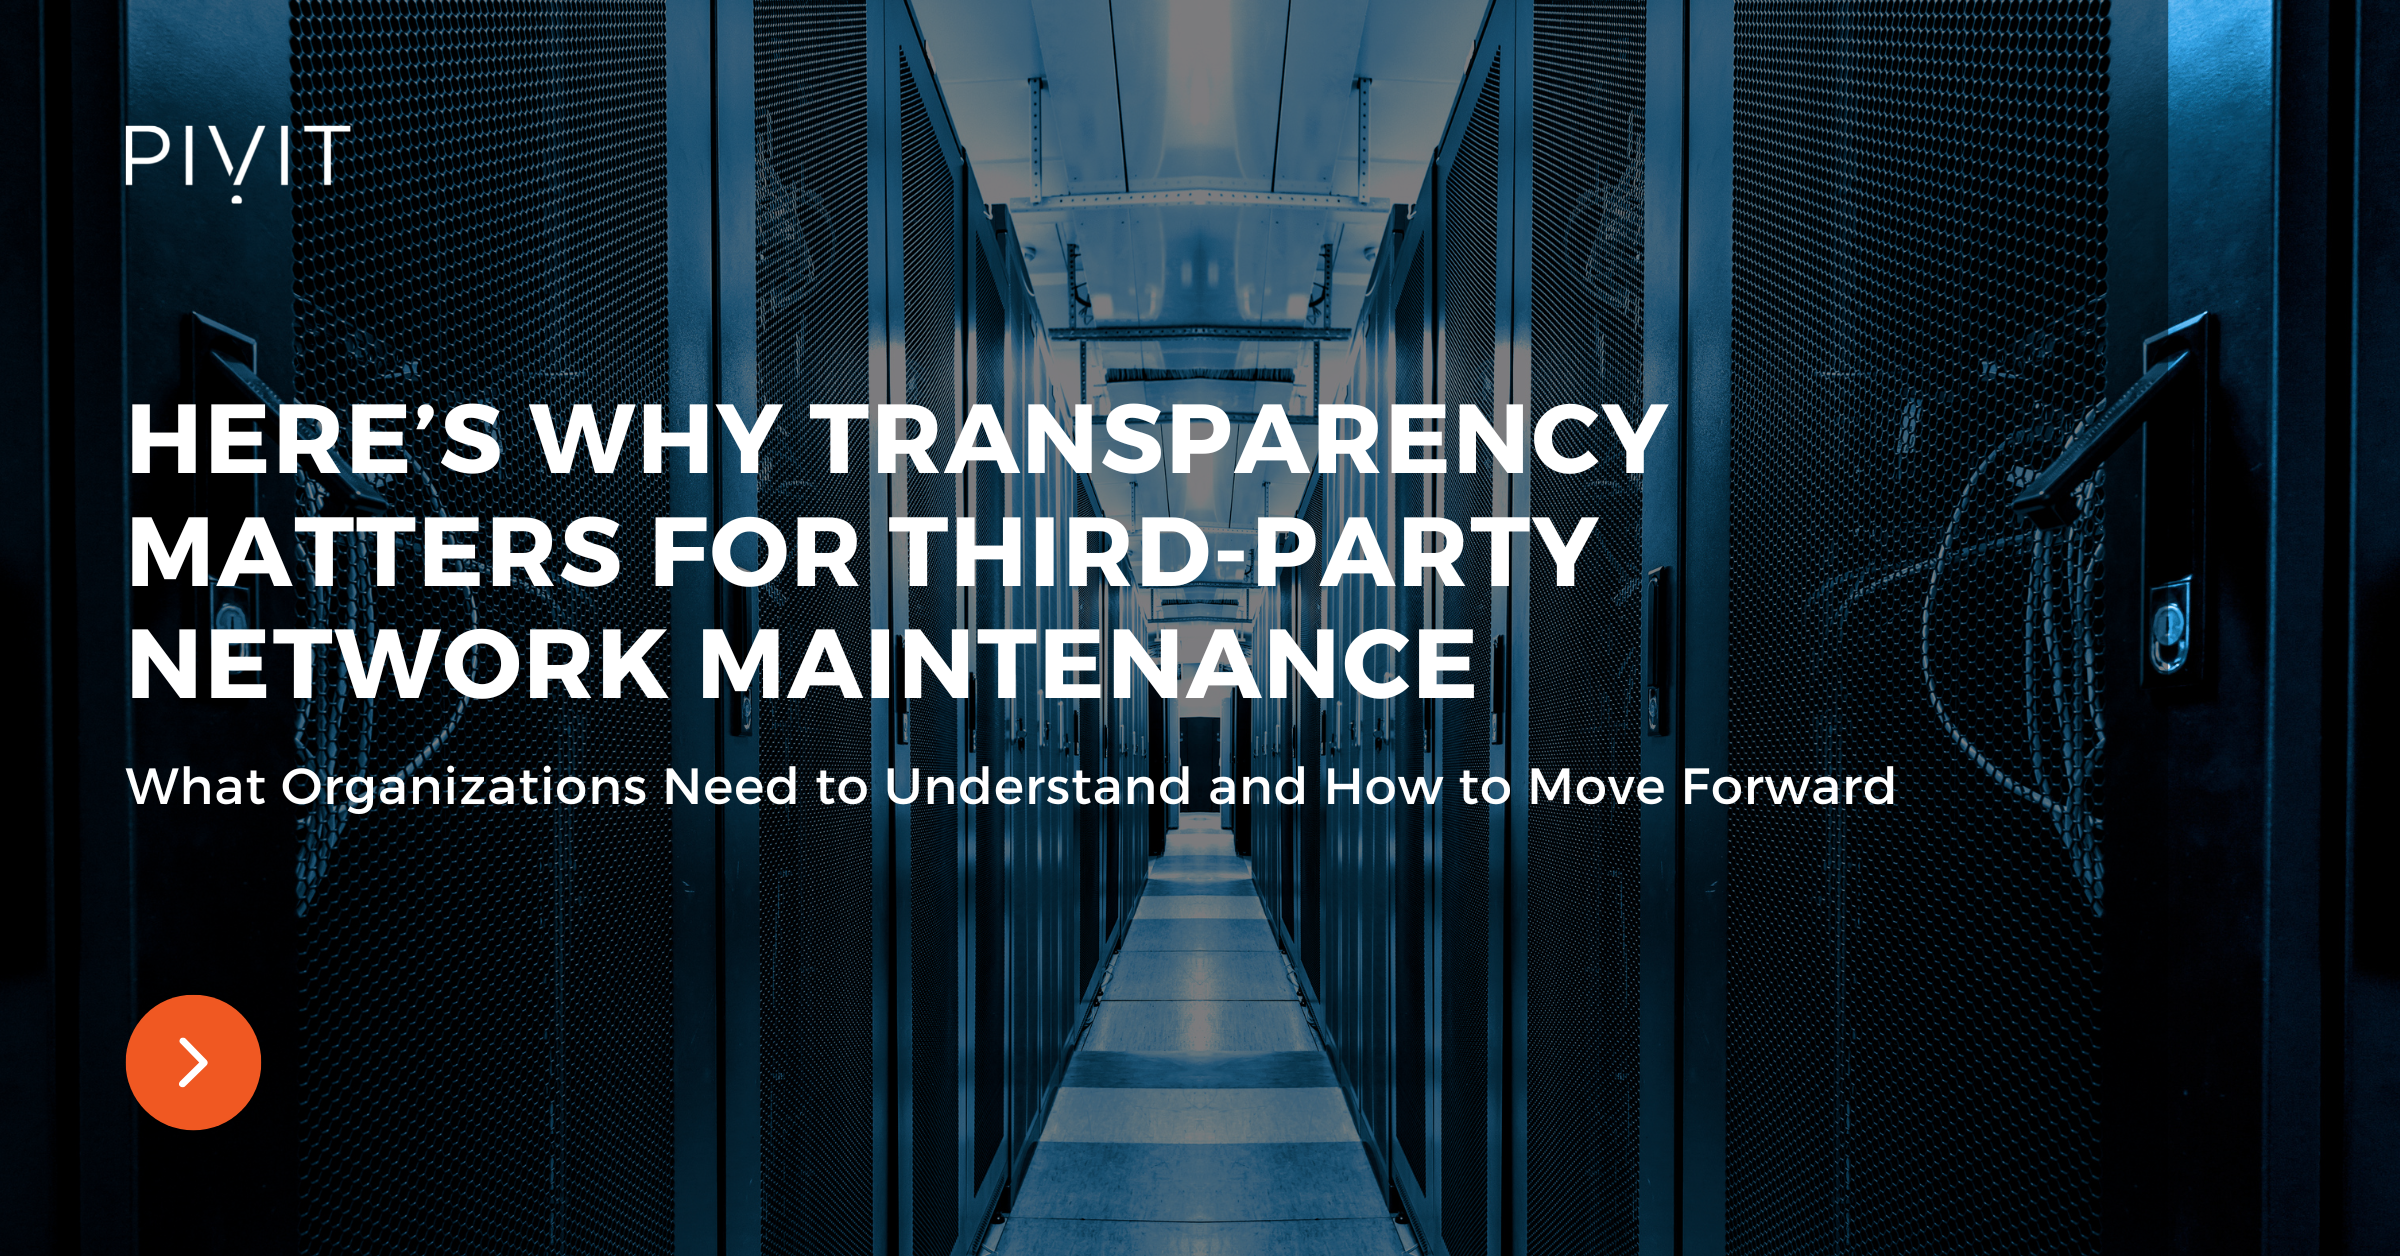 Here’s Why Transparency Matters for Third-Party Network Maintenance - What Organizations Need to Understand and How to Move Forward